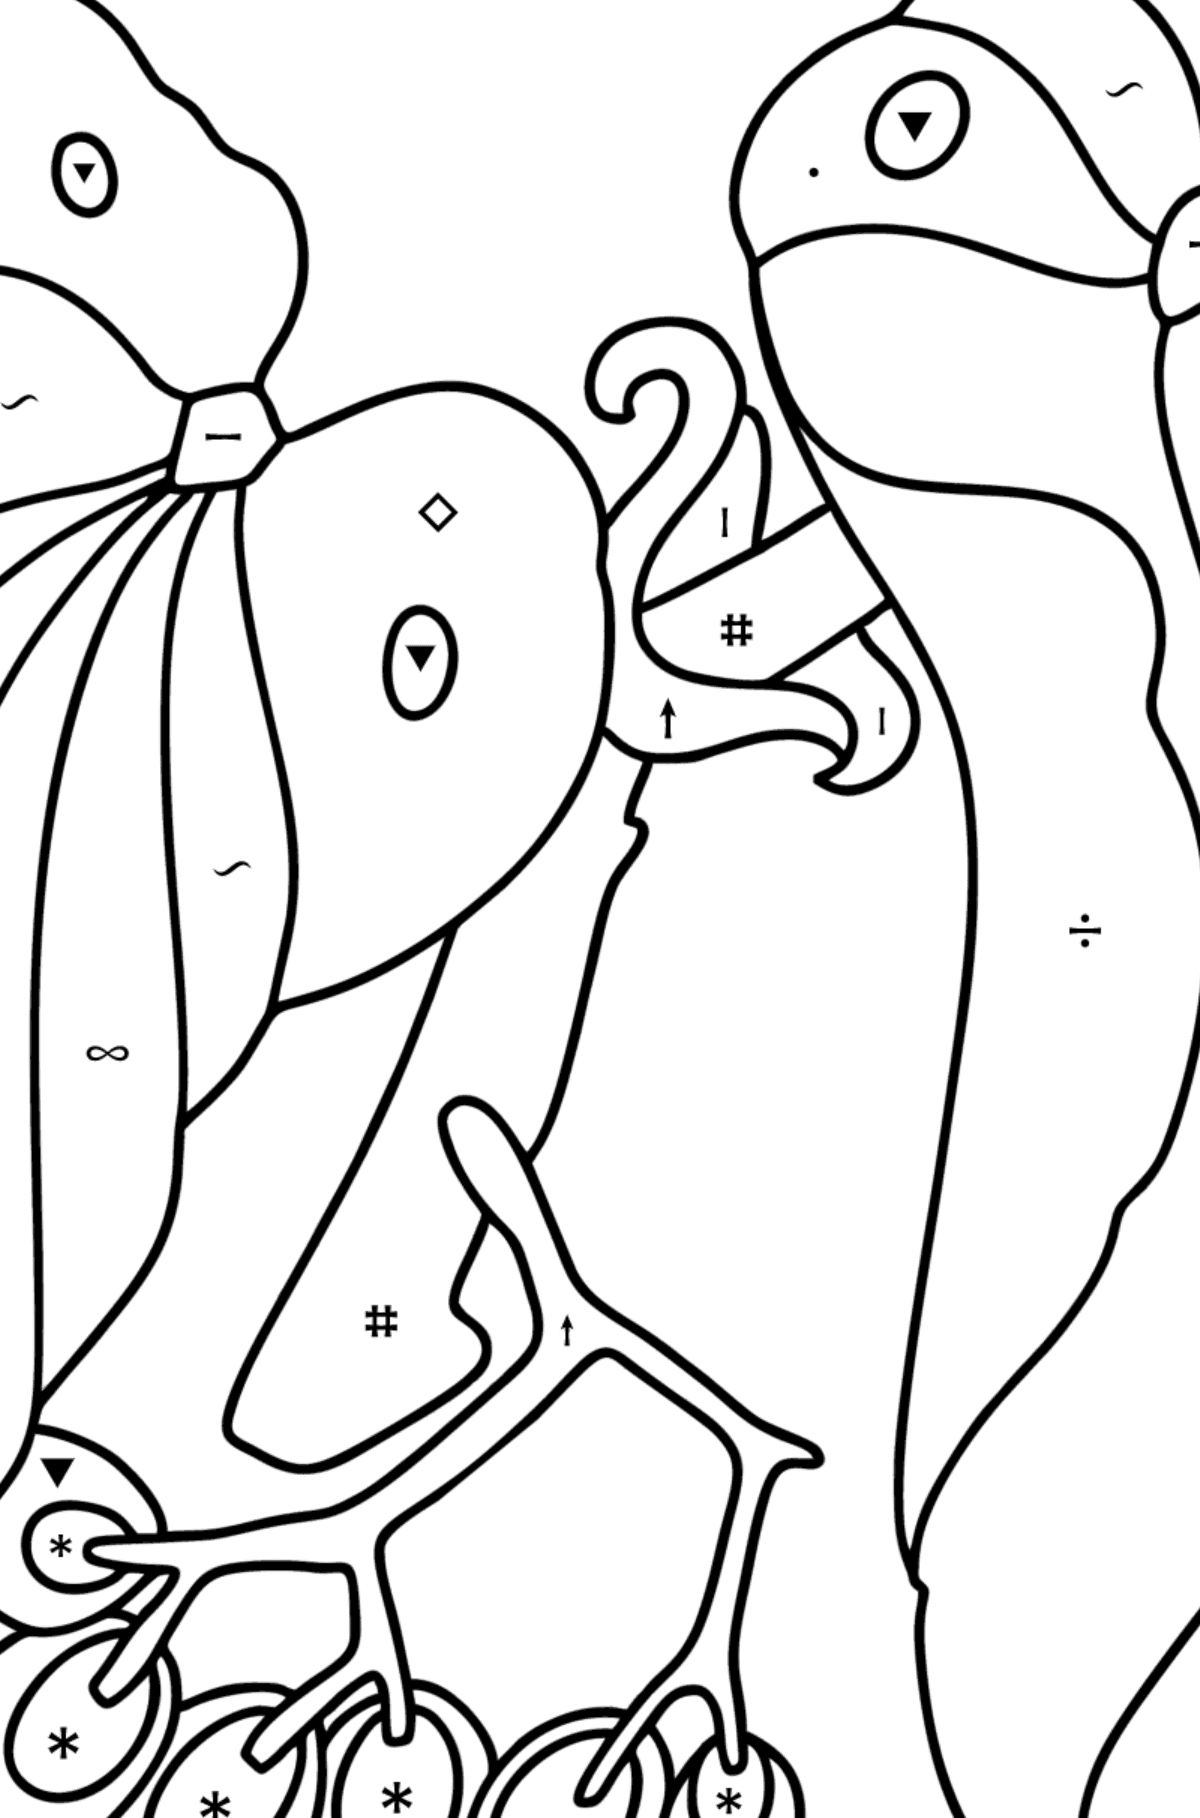 Begonia coloring page - Coloring by Symbols for Kids